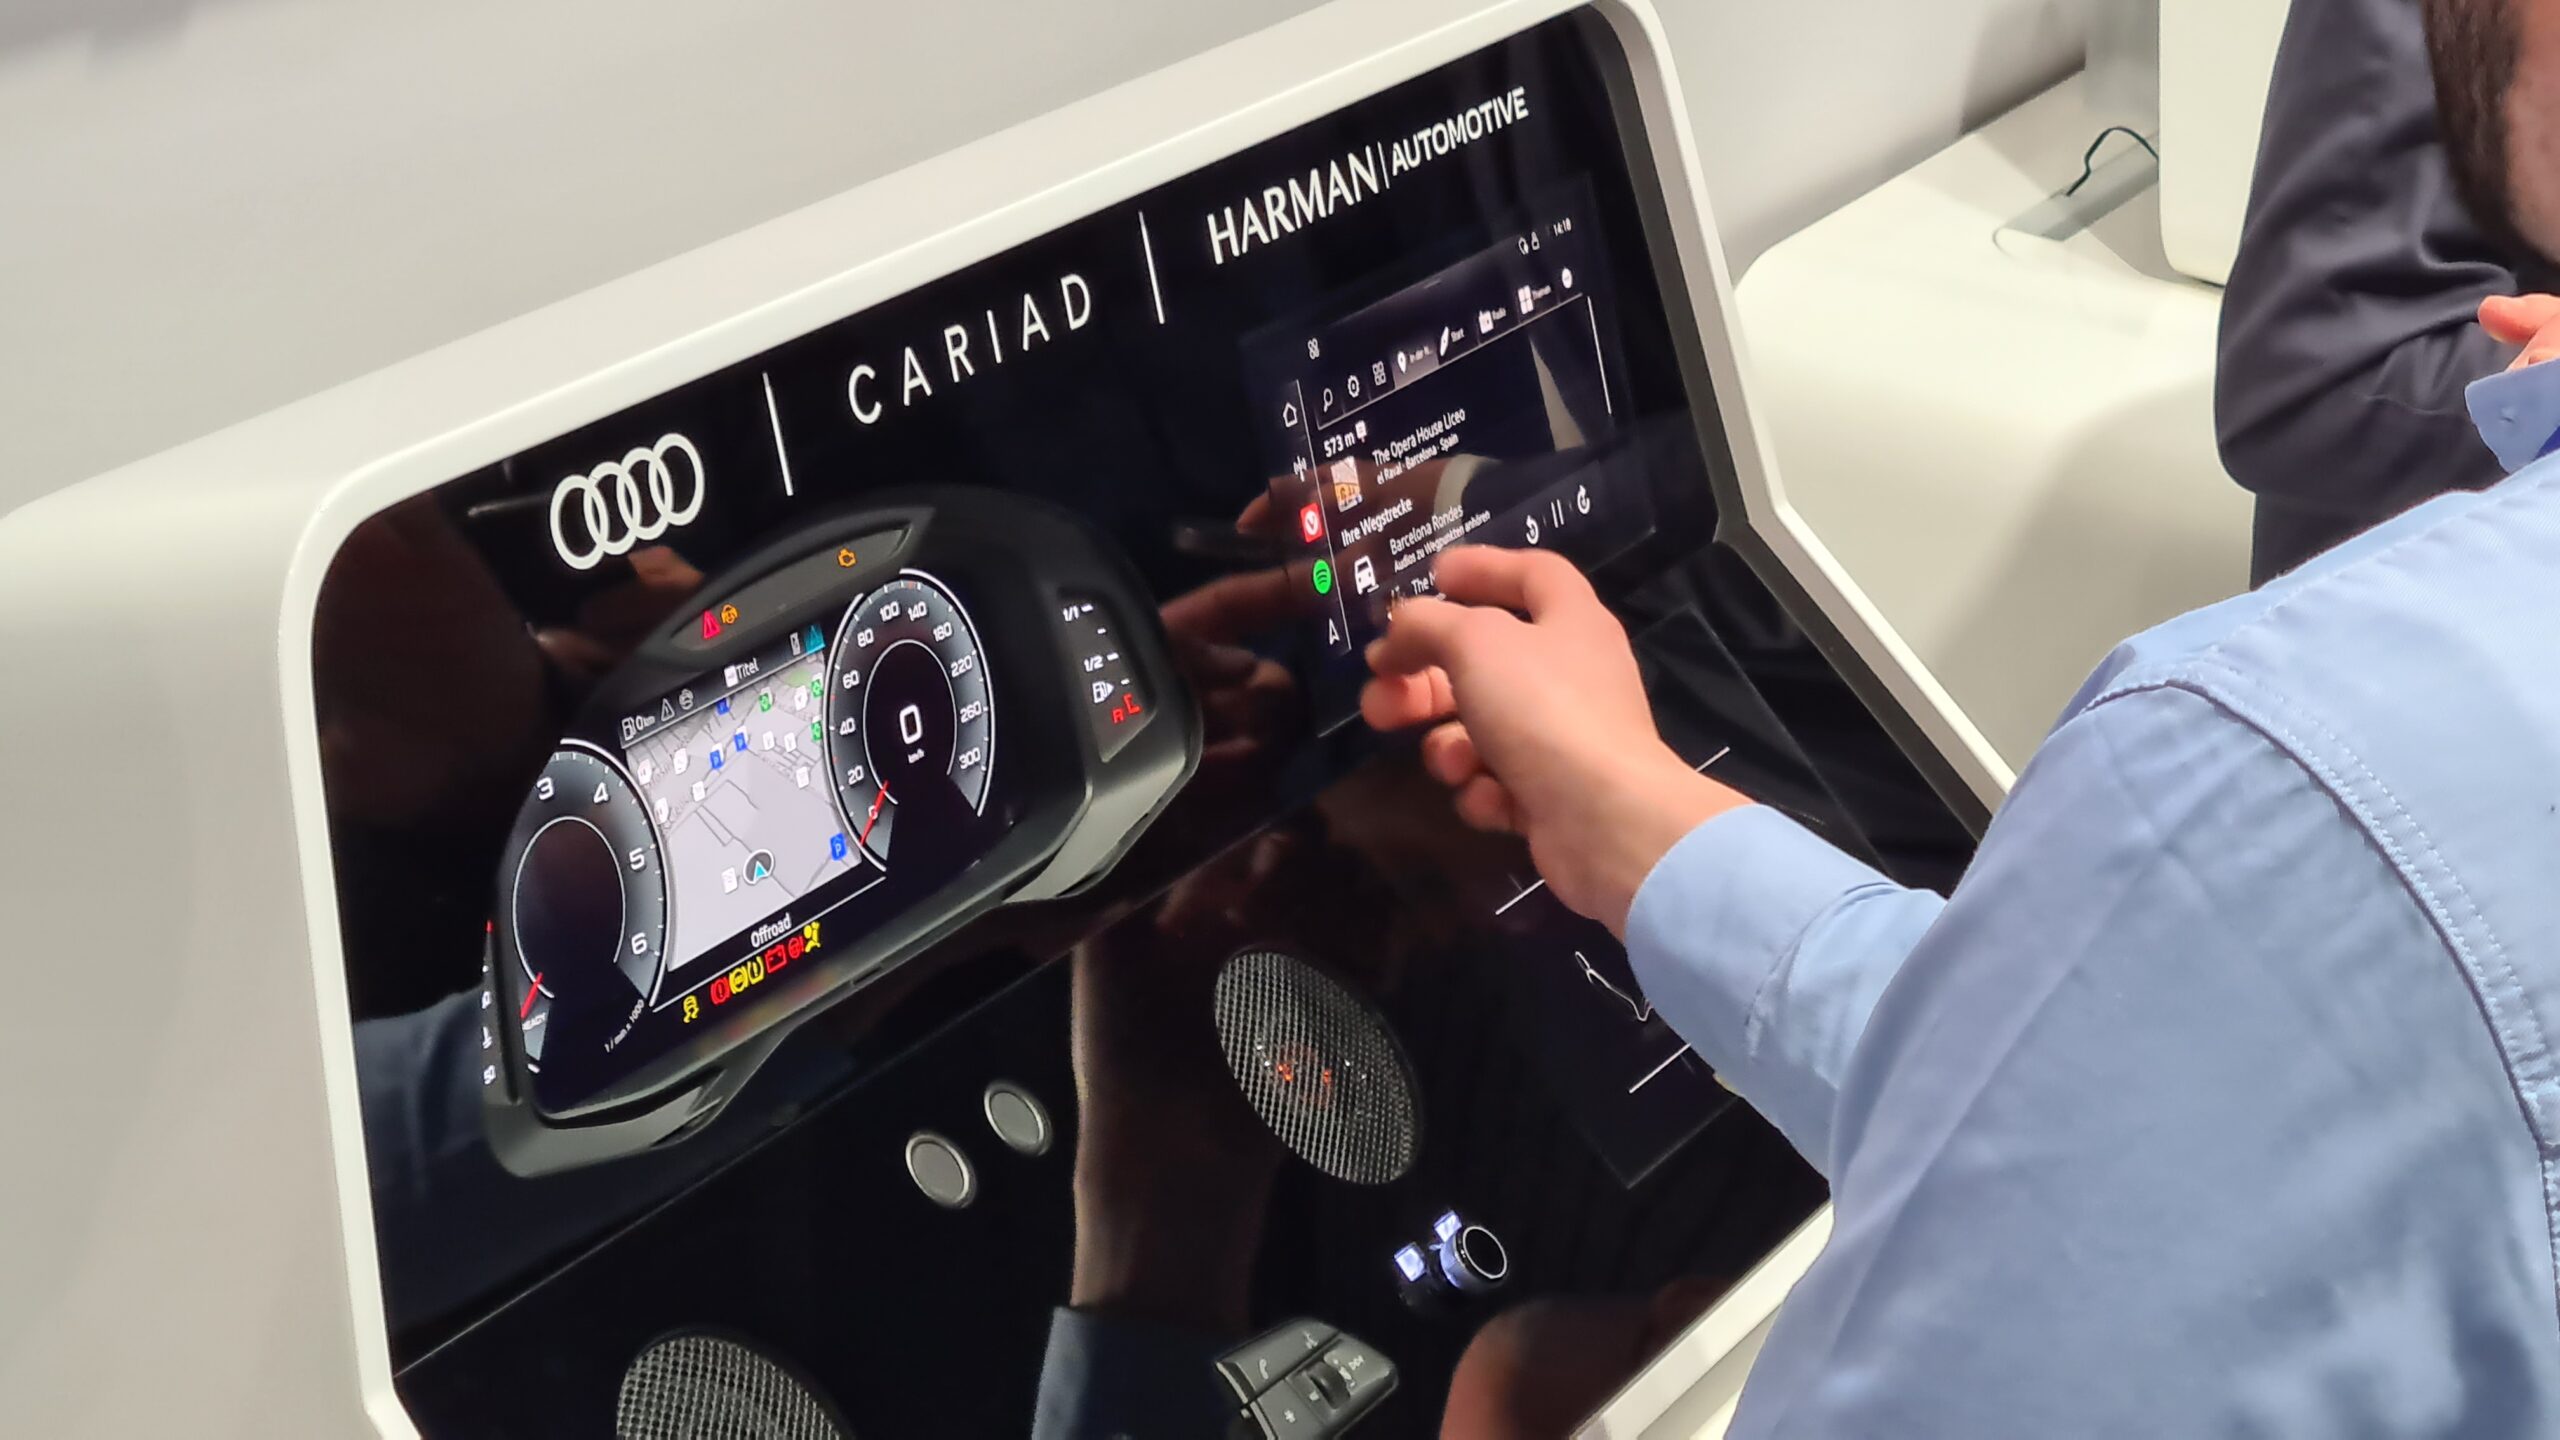 Audi app store at MWC23